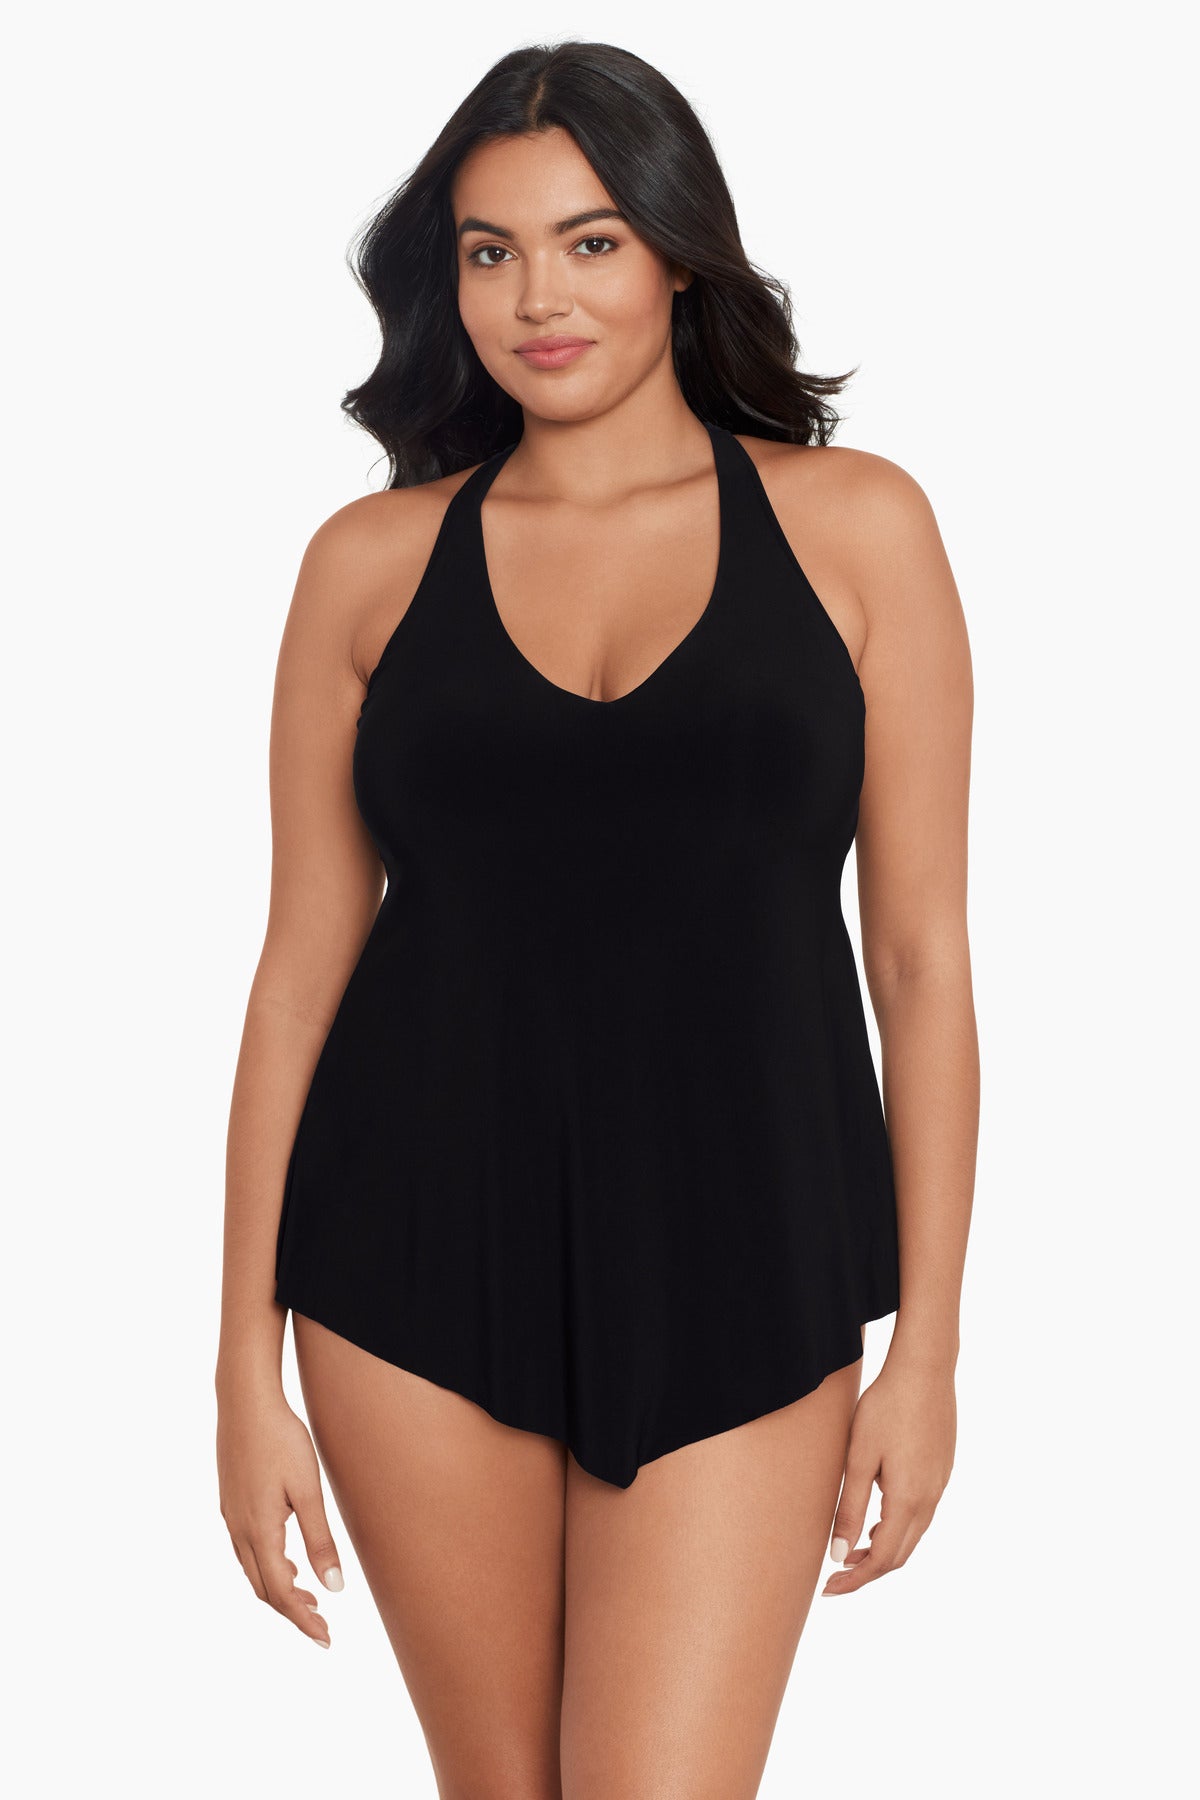  Swimsuits For All Women's Plus Size Handkerchief